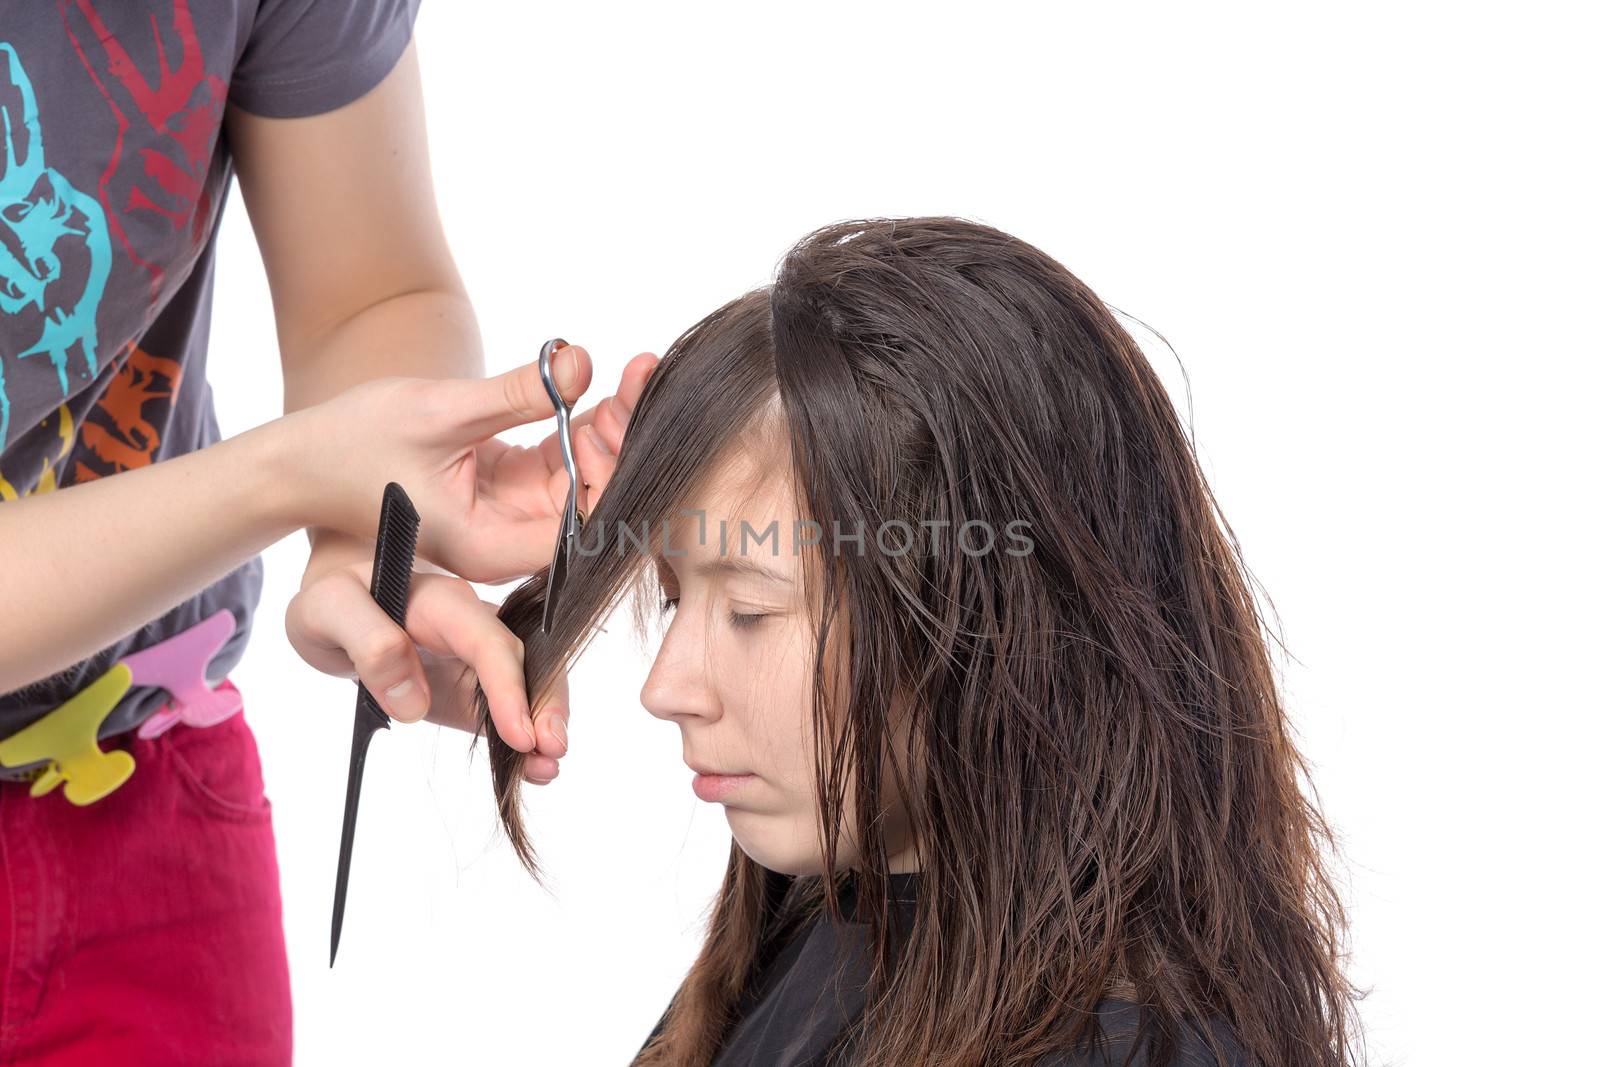 Young woman having a hair cut with a hairdresser trimming her fringe on her long brunette hair, isolated on white